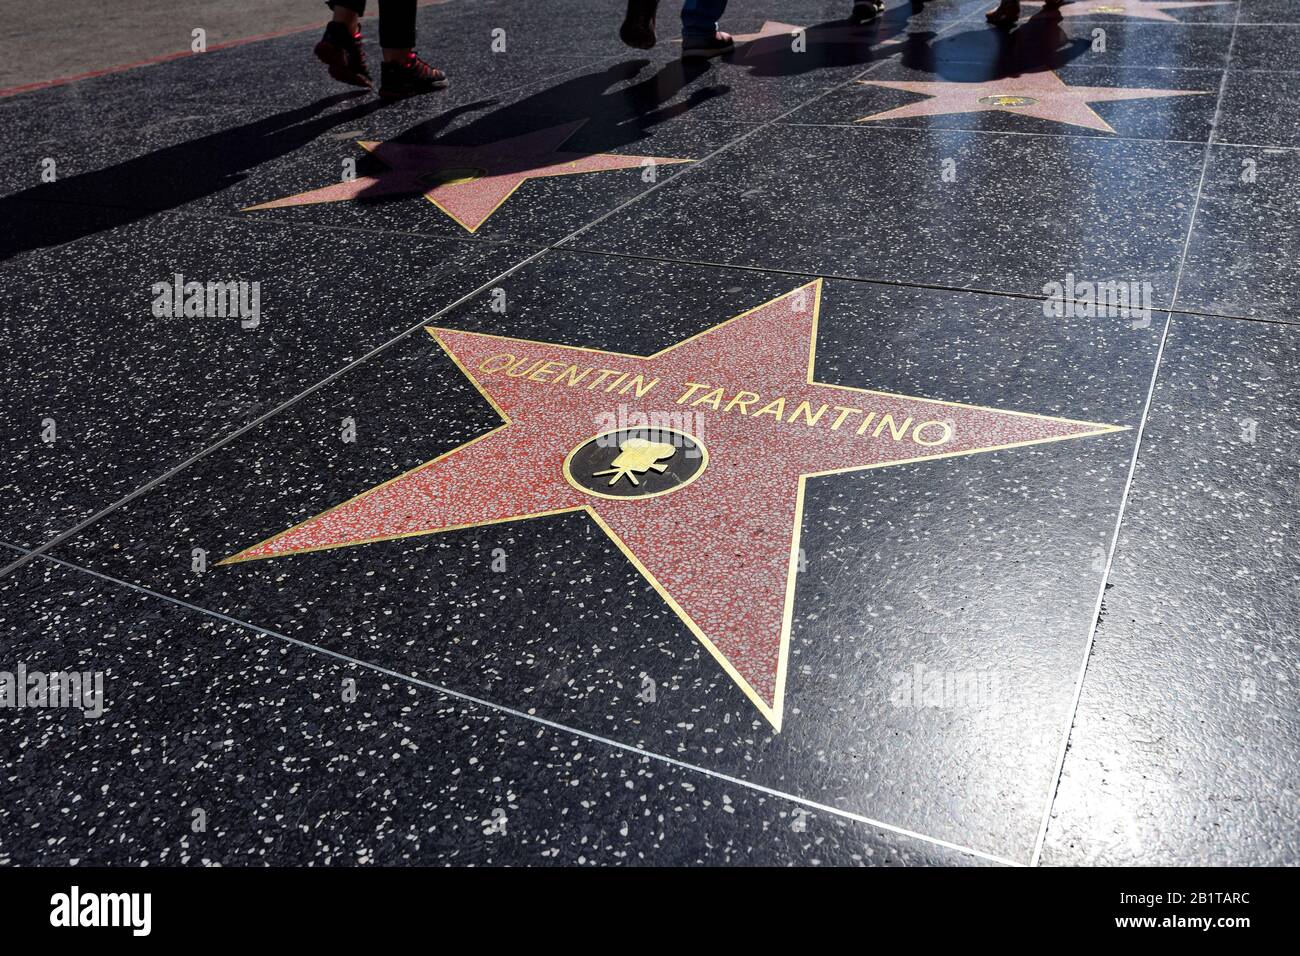 The Quentin TARANTINO's star embedded in the terrazzo floorig of the Hollywood Boulevard Walk of Fame with shadows of tourists in the background. Stock Photo